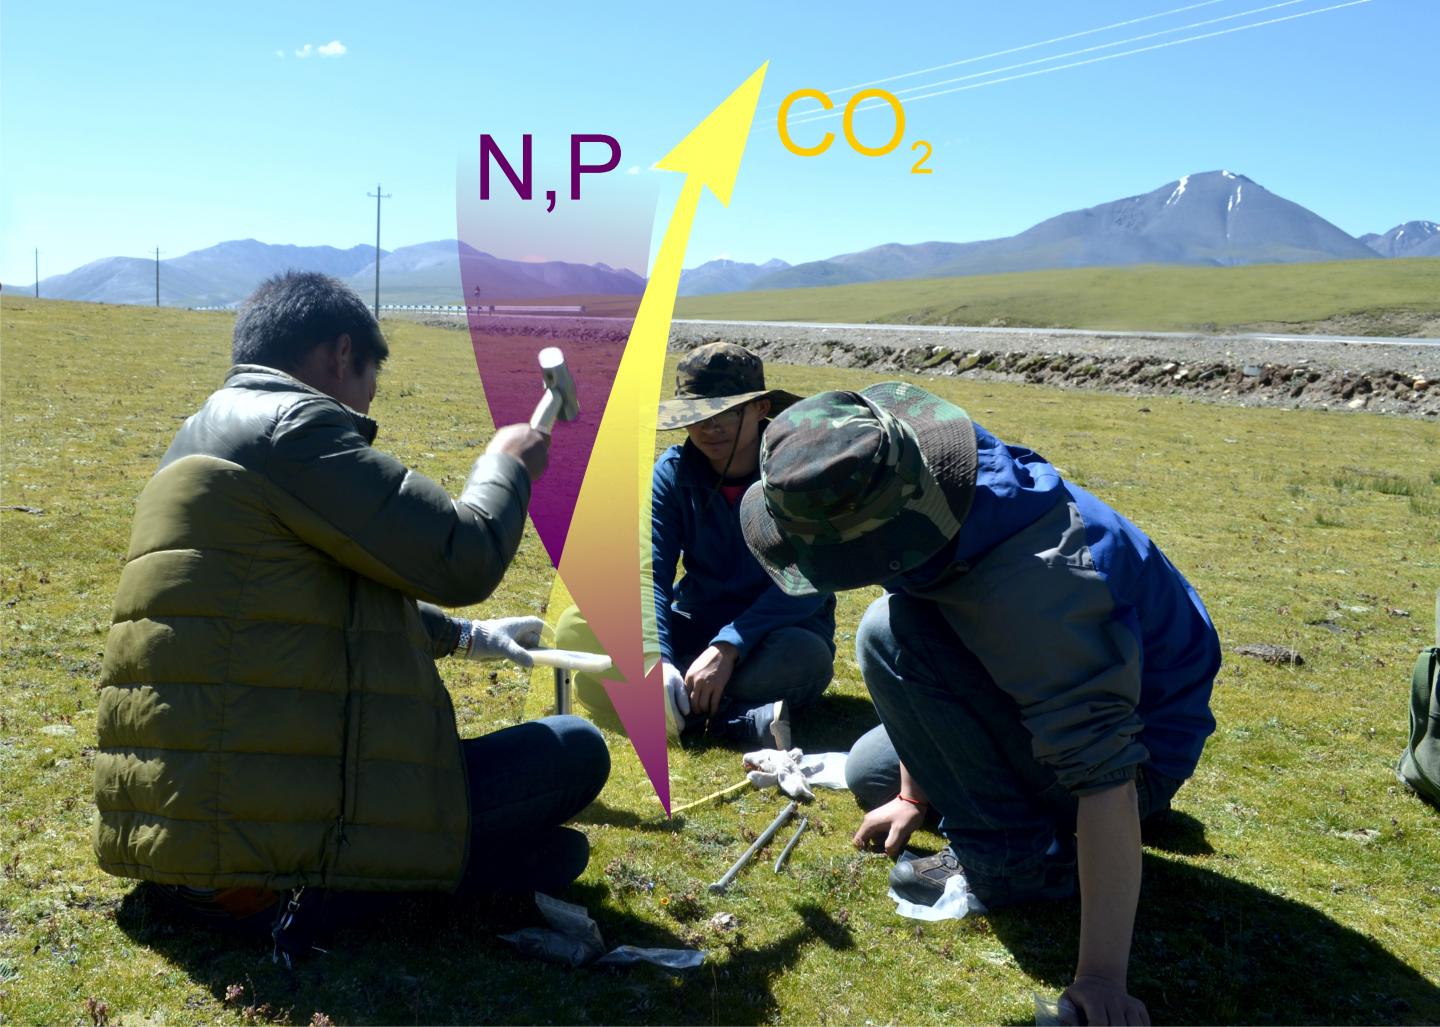 Tibetan Soil Enrichment with Nitrogen and Phosphorus Leads to Carbon Loss